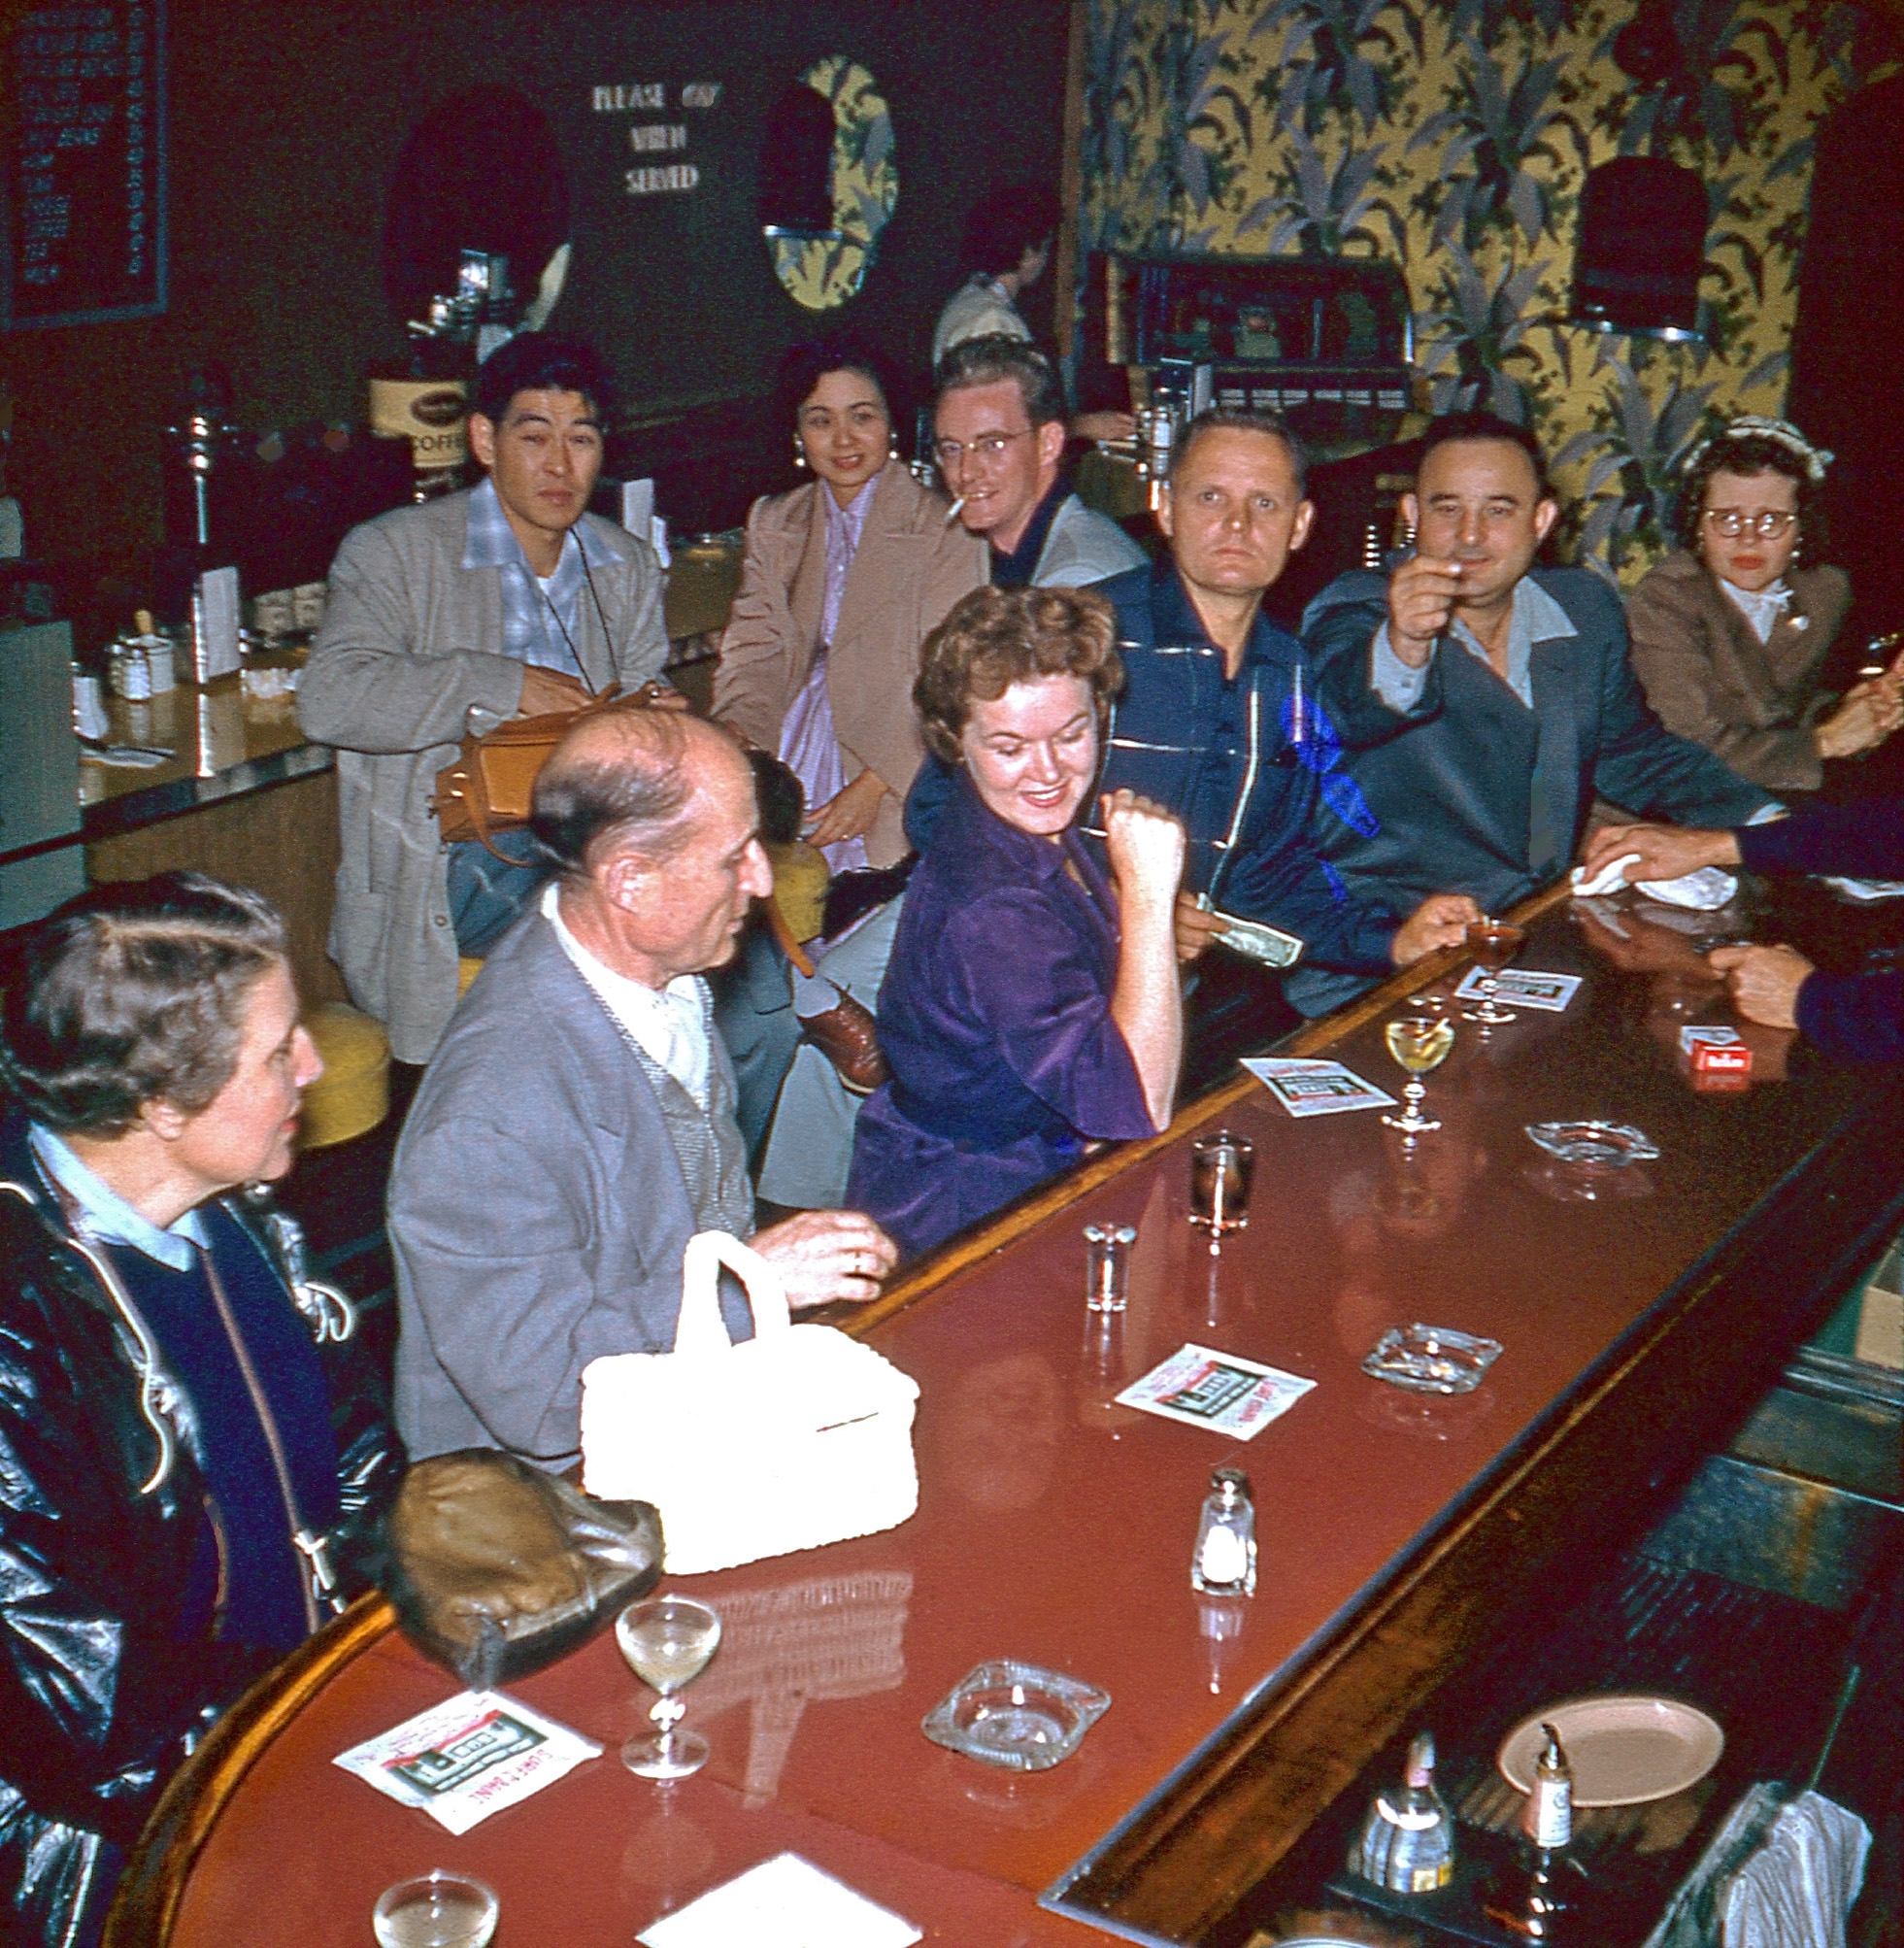 Mid-50s bar scene, possibly in the Los Angeles area. From one half of a stereo slide I found in a thrift store. If the resolution was just a bit higher we could get a name off those napkins. View full size.